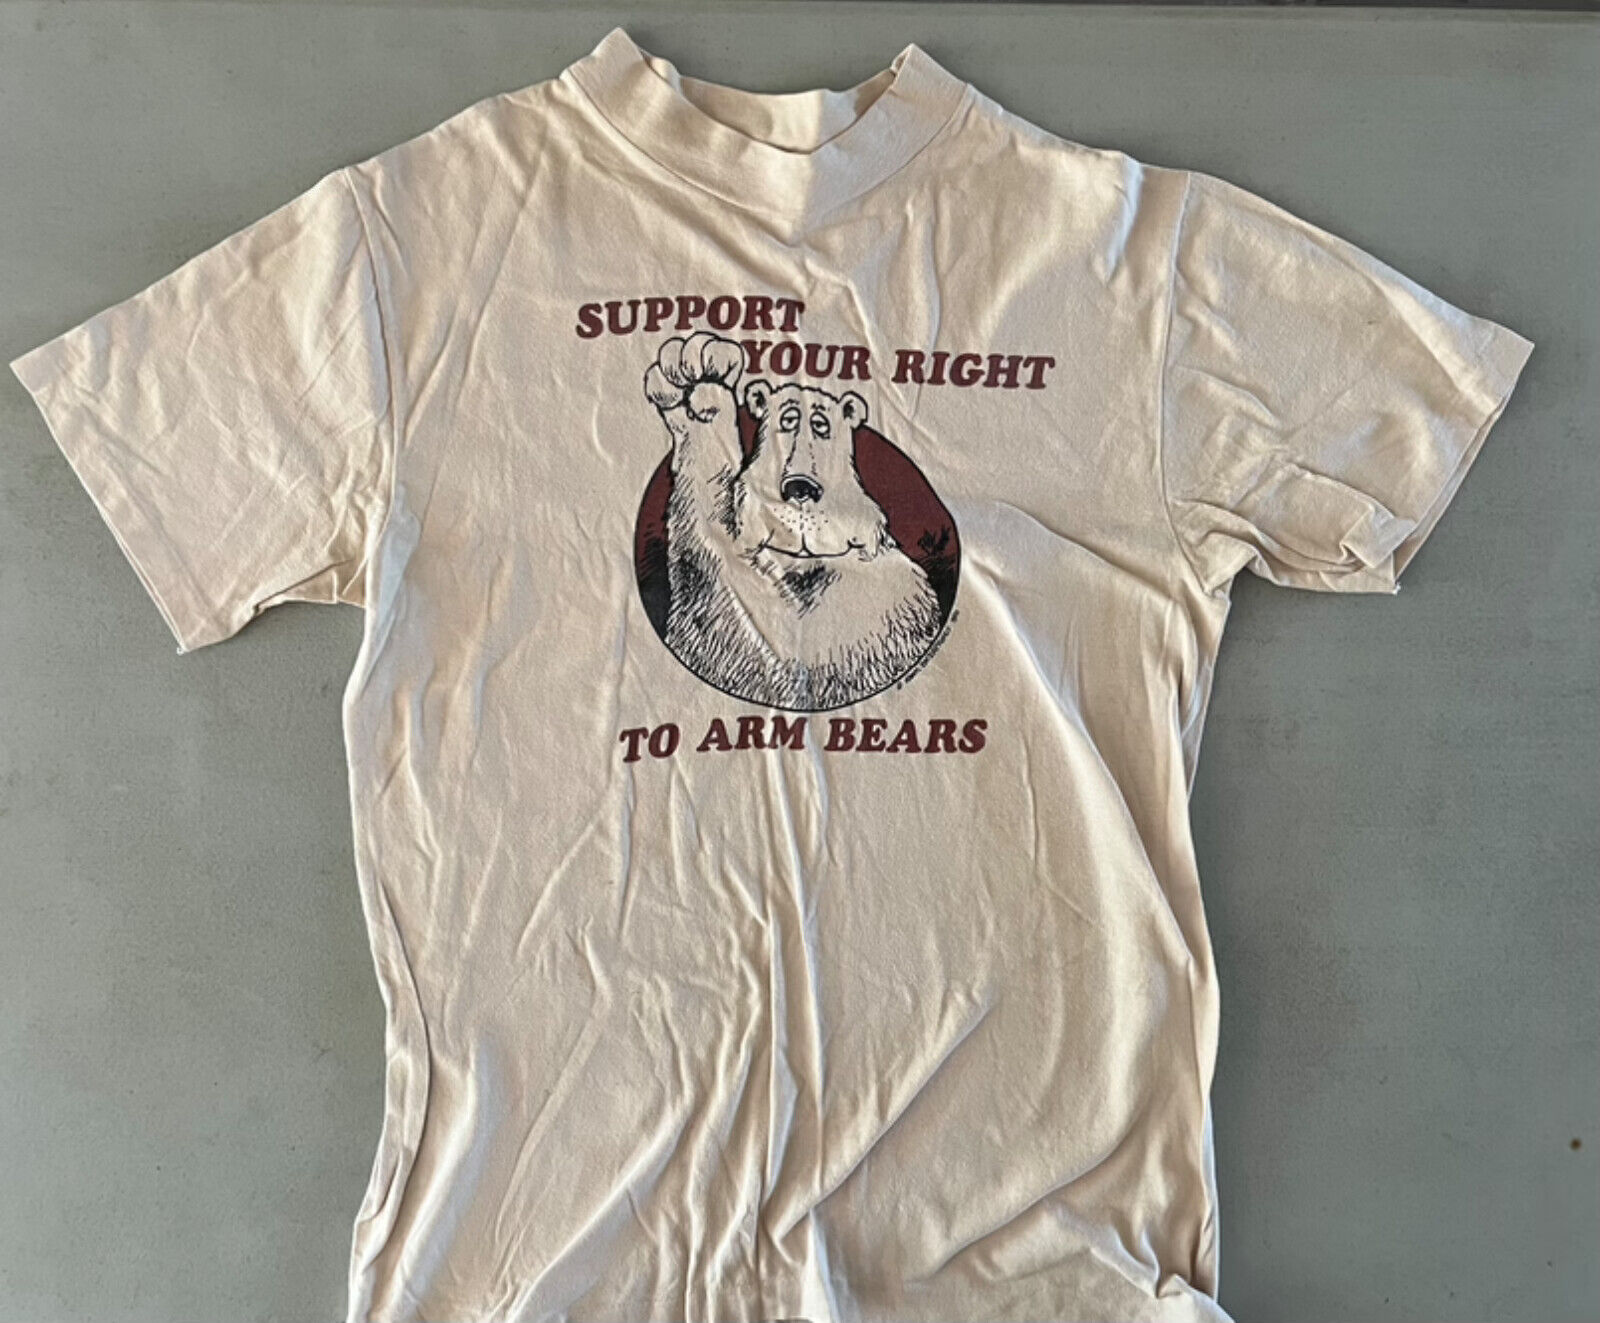 Support Your Right To Arm Bears large T-shirt gun control animal rights cause